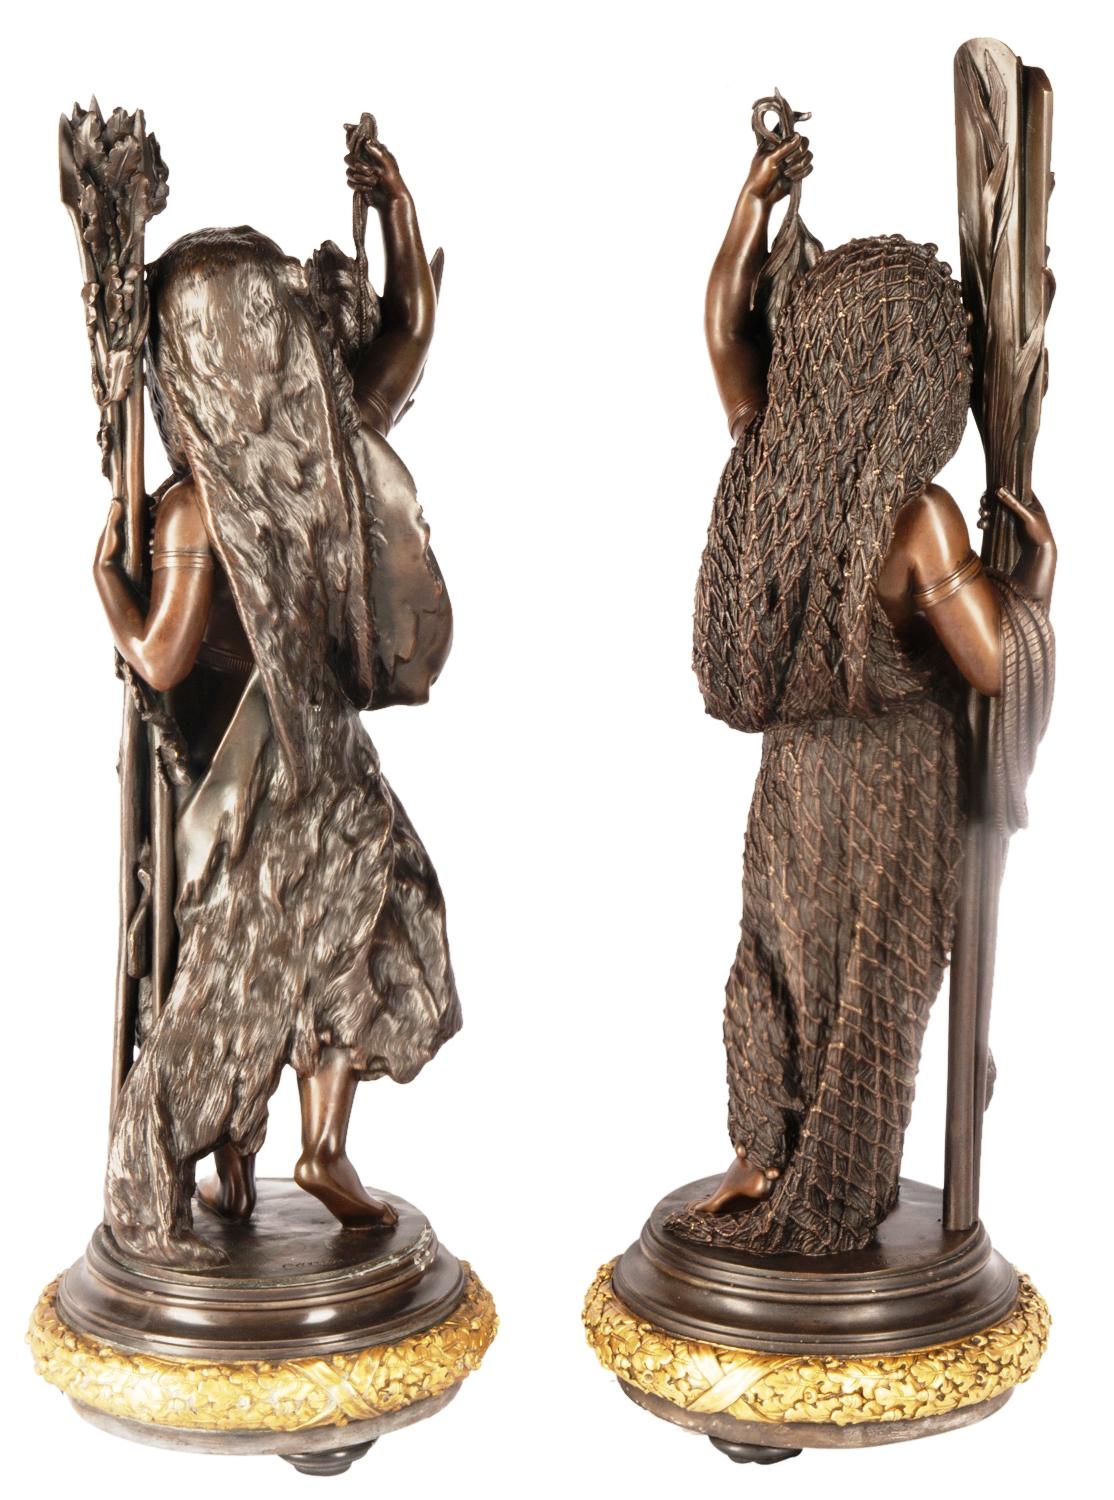 French Bronze Figures by 'Carrier' of Hunting and Fishing, 19th Century